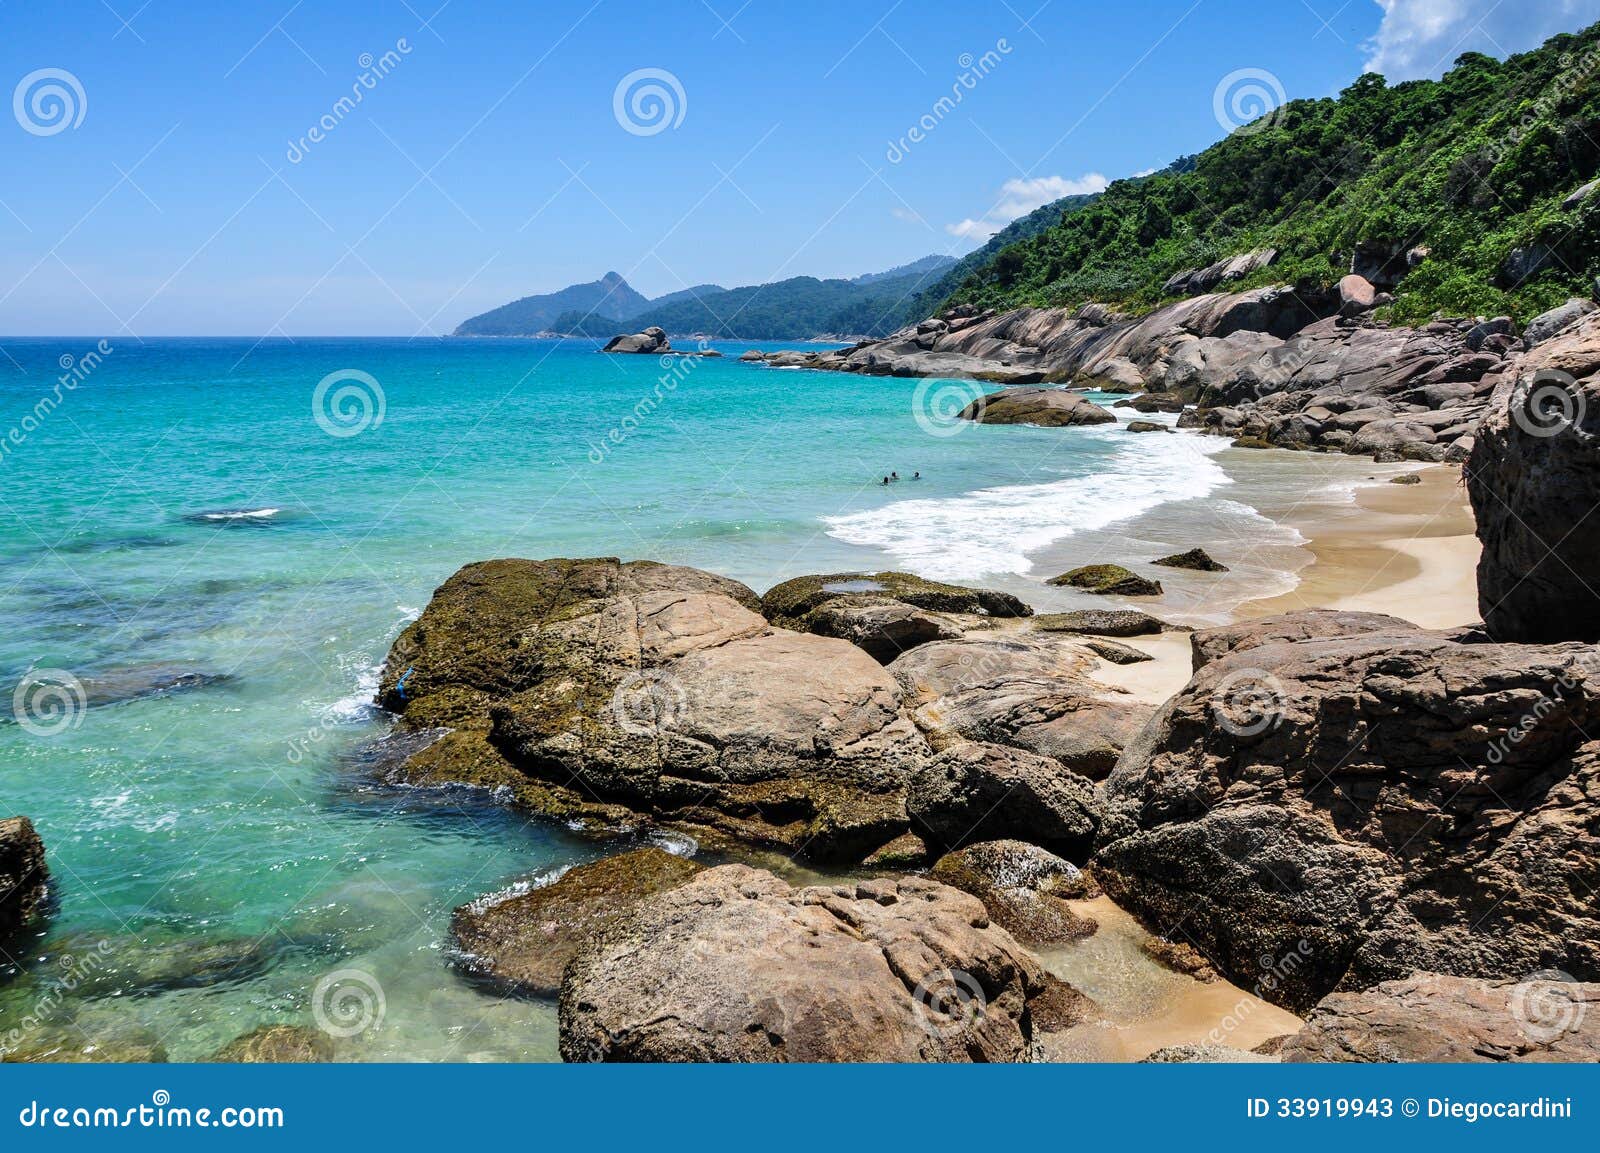 swimming and enjoying the beach and nature of lopes mendes at ilha grande. brazil. rio do janeiro.